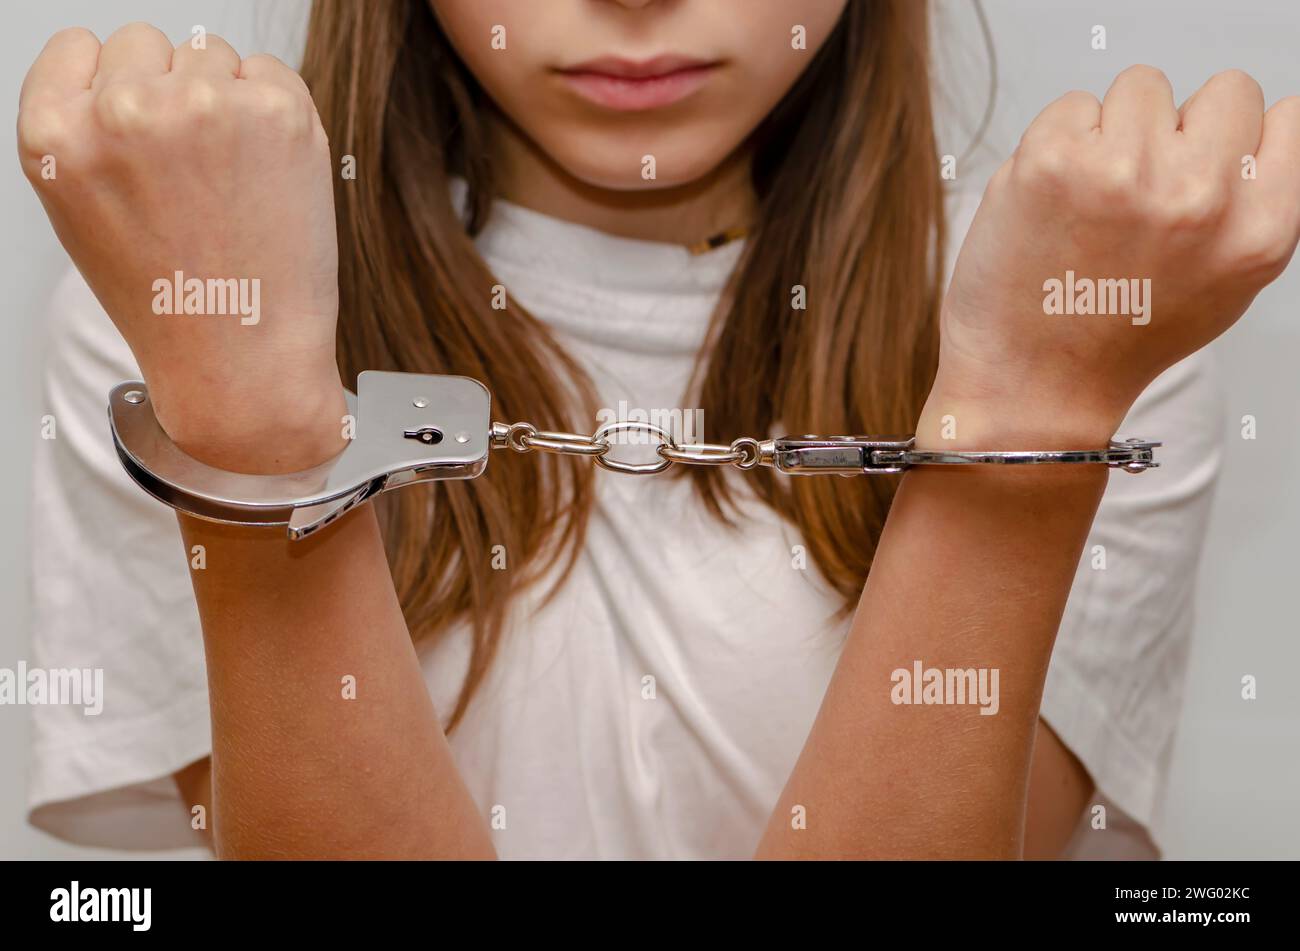 Teenage girl in handcuffs on gray background. Juvenile delinquent, criminal responsibility of juveniles. Stock Photo